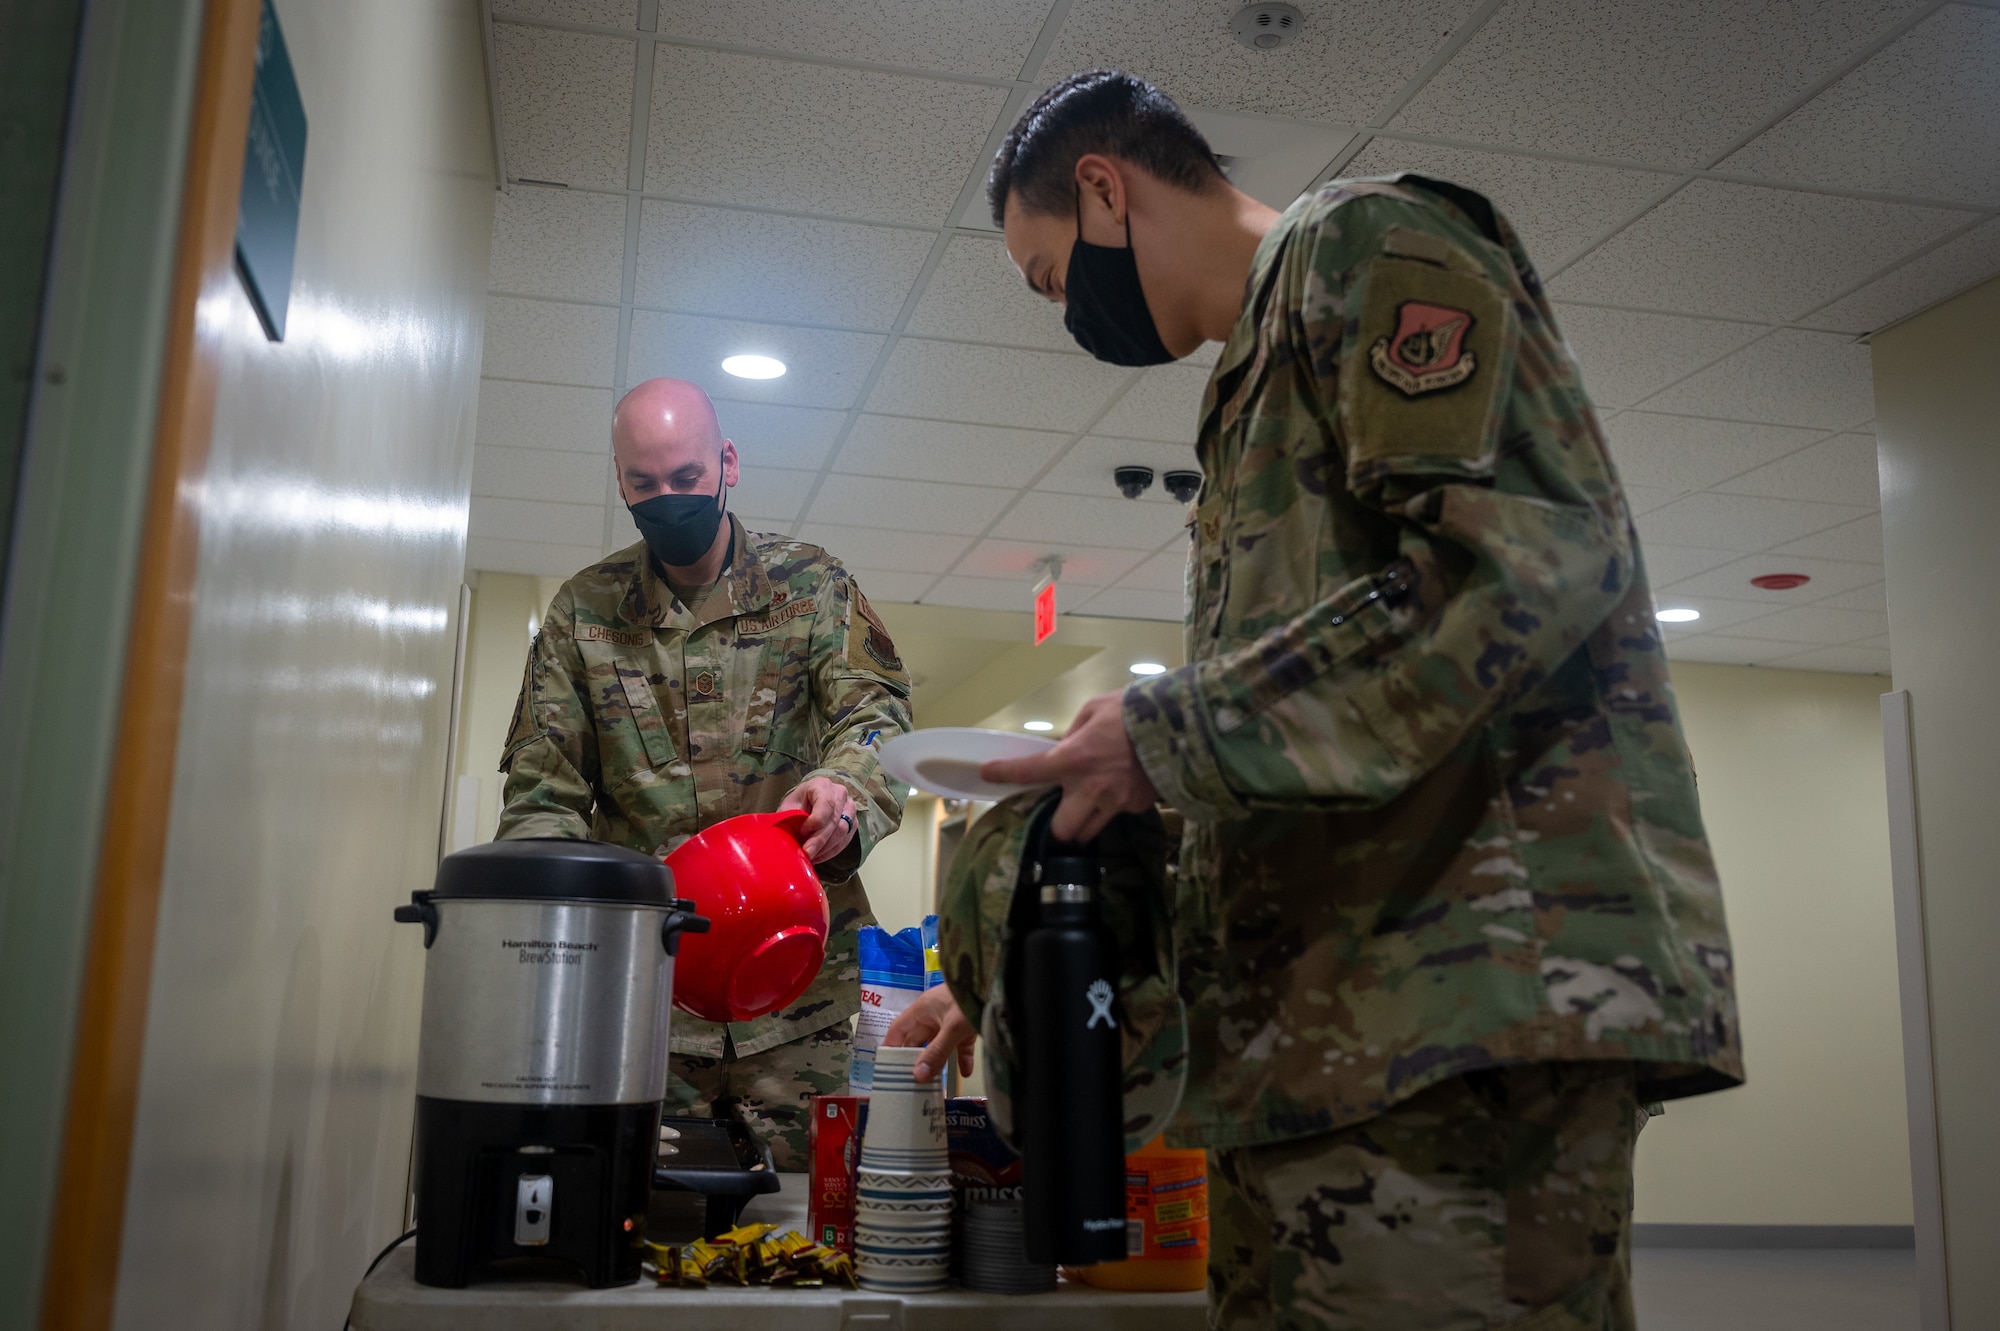 Master Sgt. Jason Chesonis, 694th Intelligence, Surveillance and Reconnaissance Group 1st Sgt., finishes cooking pancakes for a dorm resident during the “Storm the Dorm” event